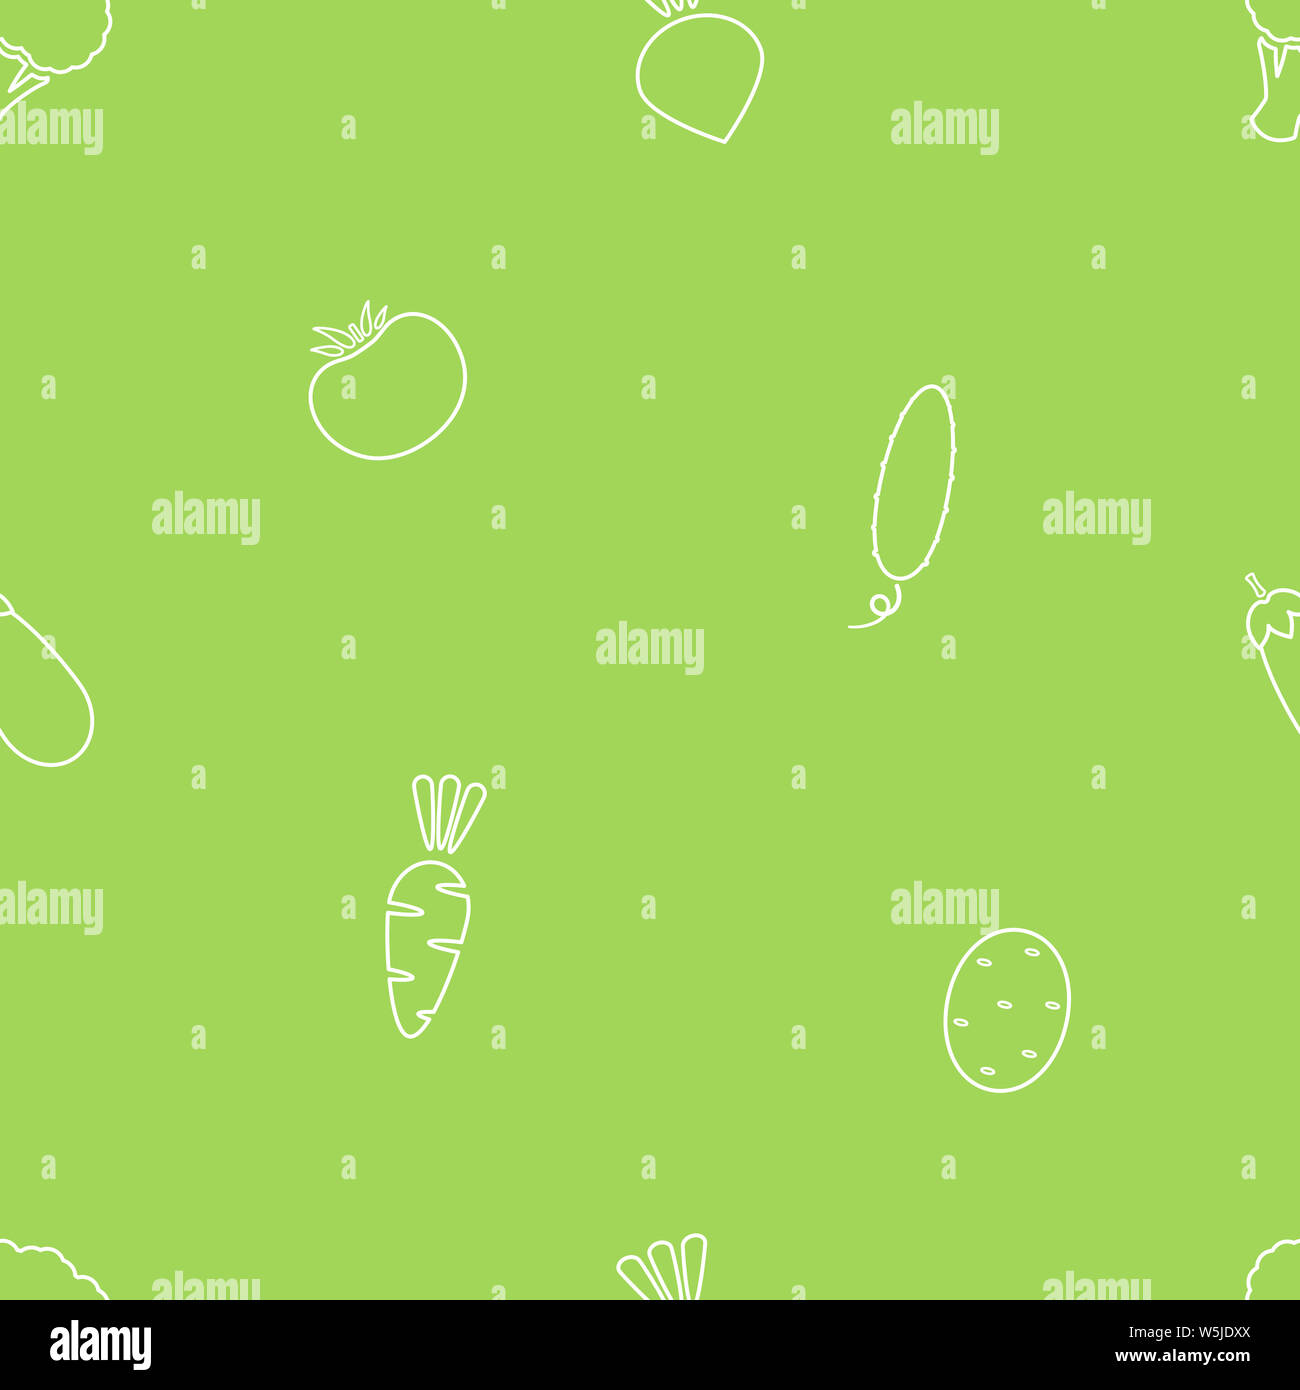 Line vegetable seamless background flat illustration. Fresh food background in white and green color with season vegetable silhouette seamless element for wrapping paper or restaurant wallpaper Stock Photo